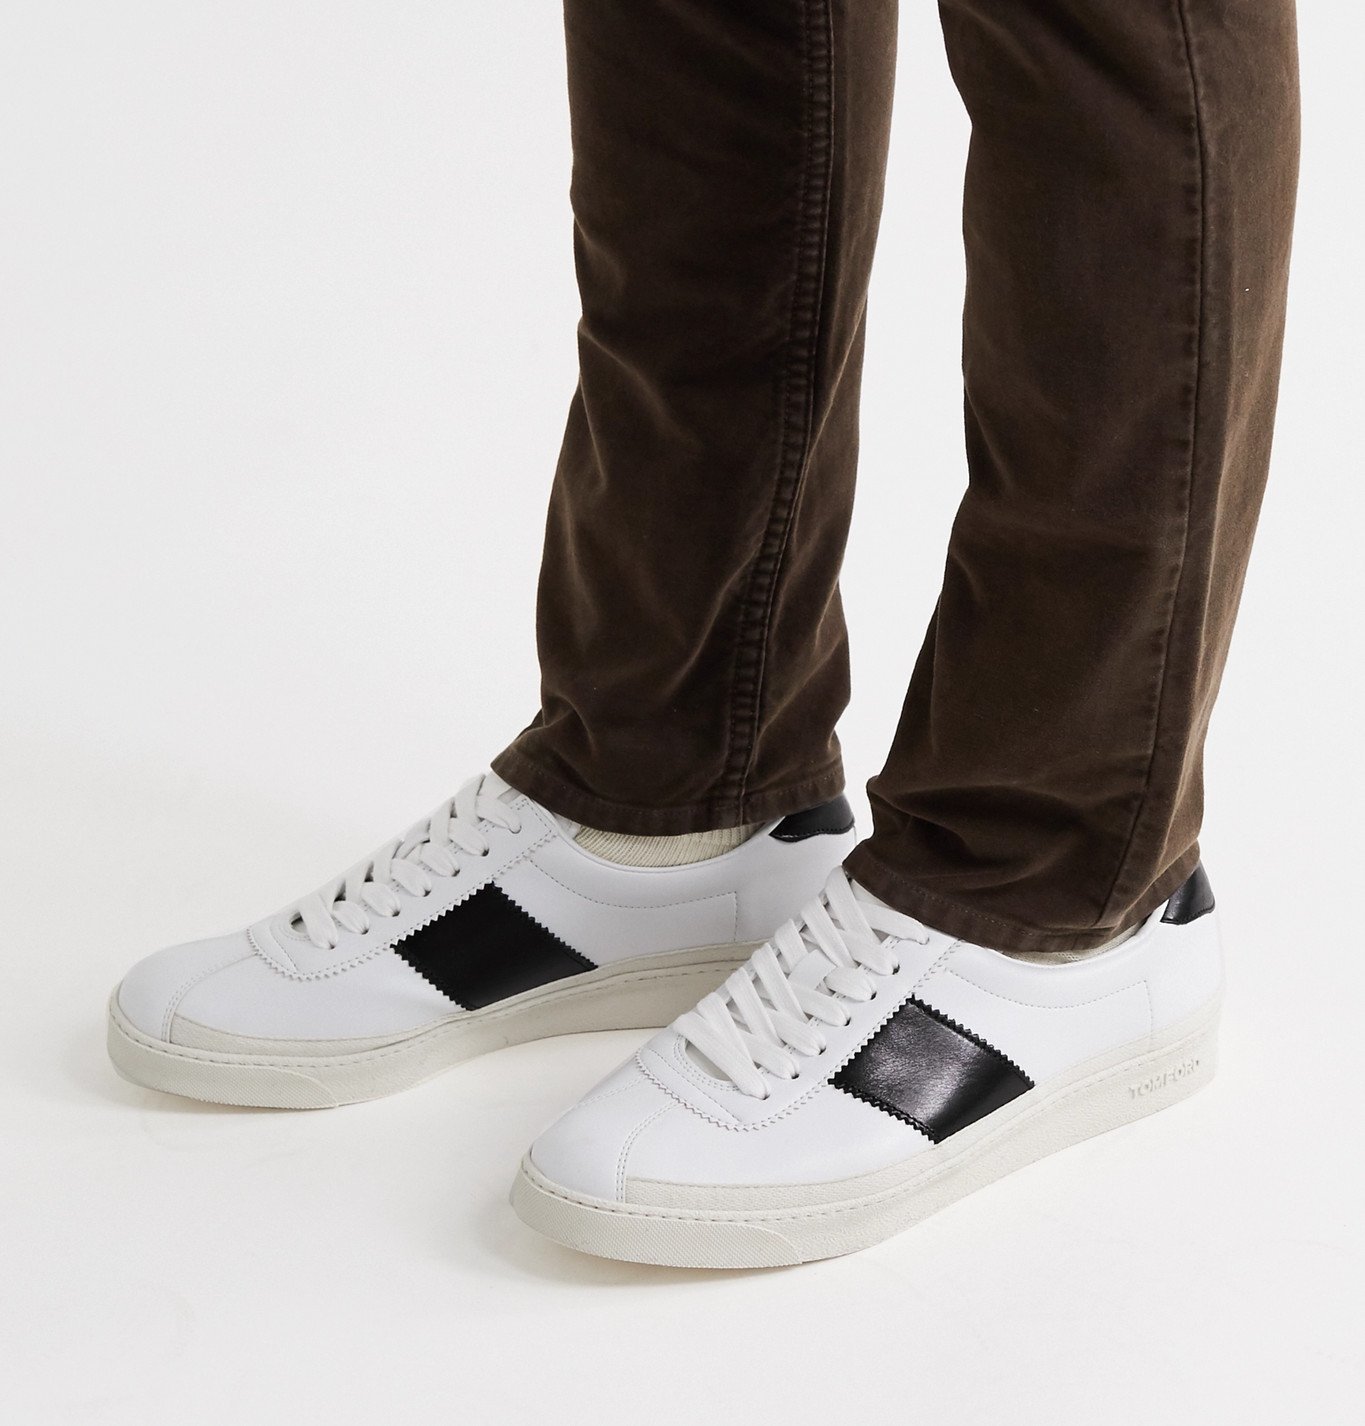 TOM FORD - Bannister Leather Sneakers - White TOM FORD